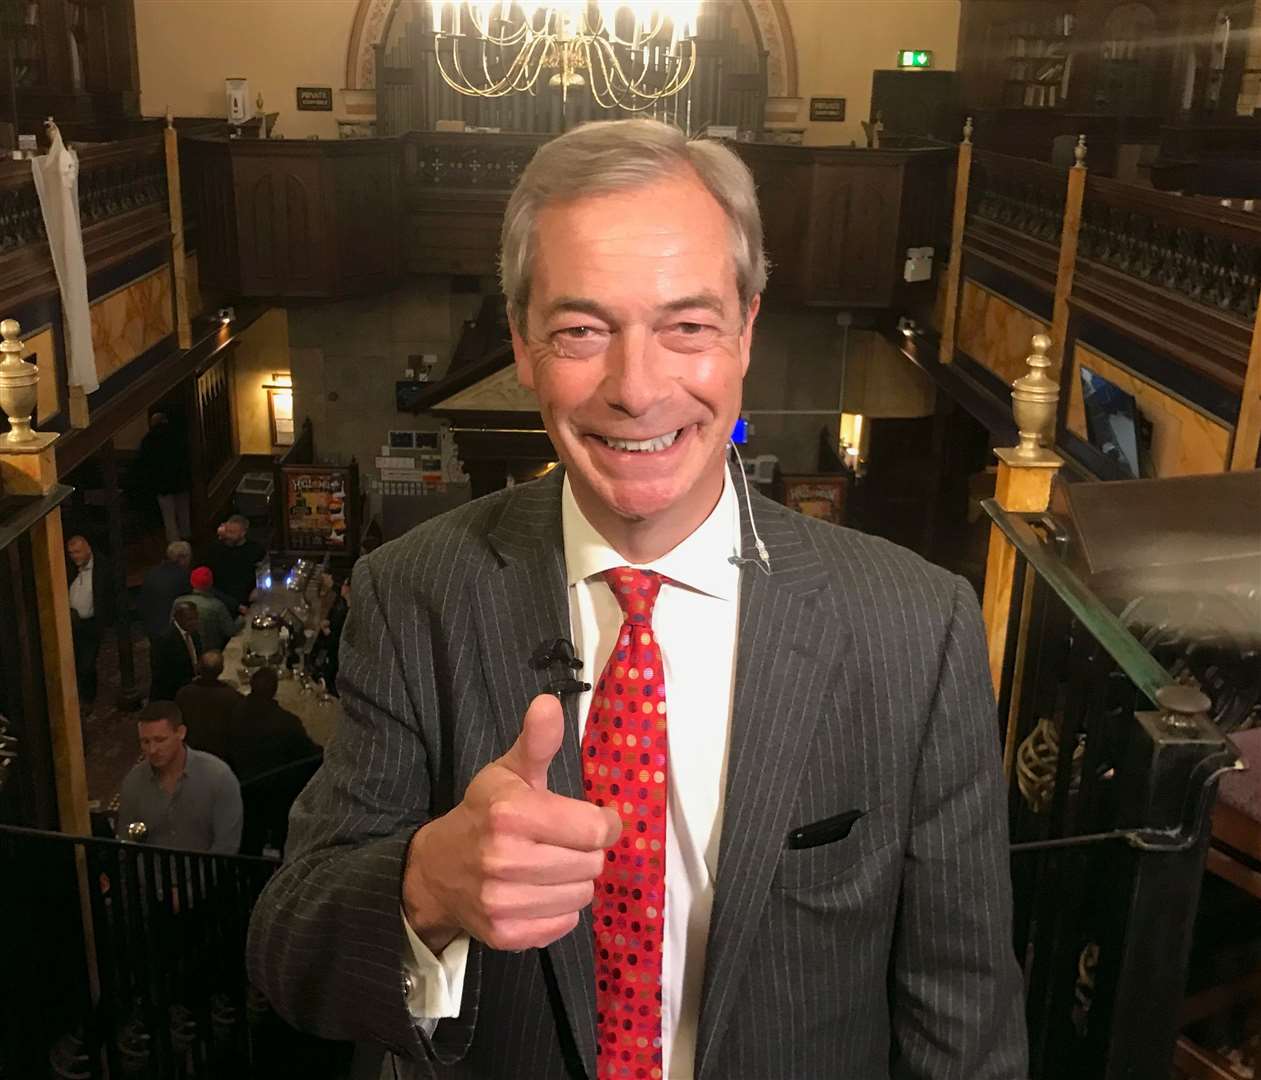 Former Brexit leader Nigel Farage has bought a house in Kent